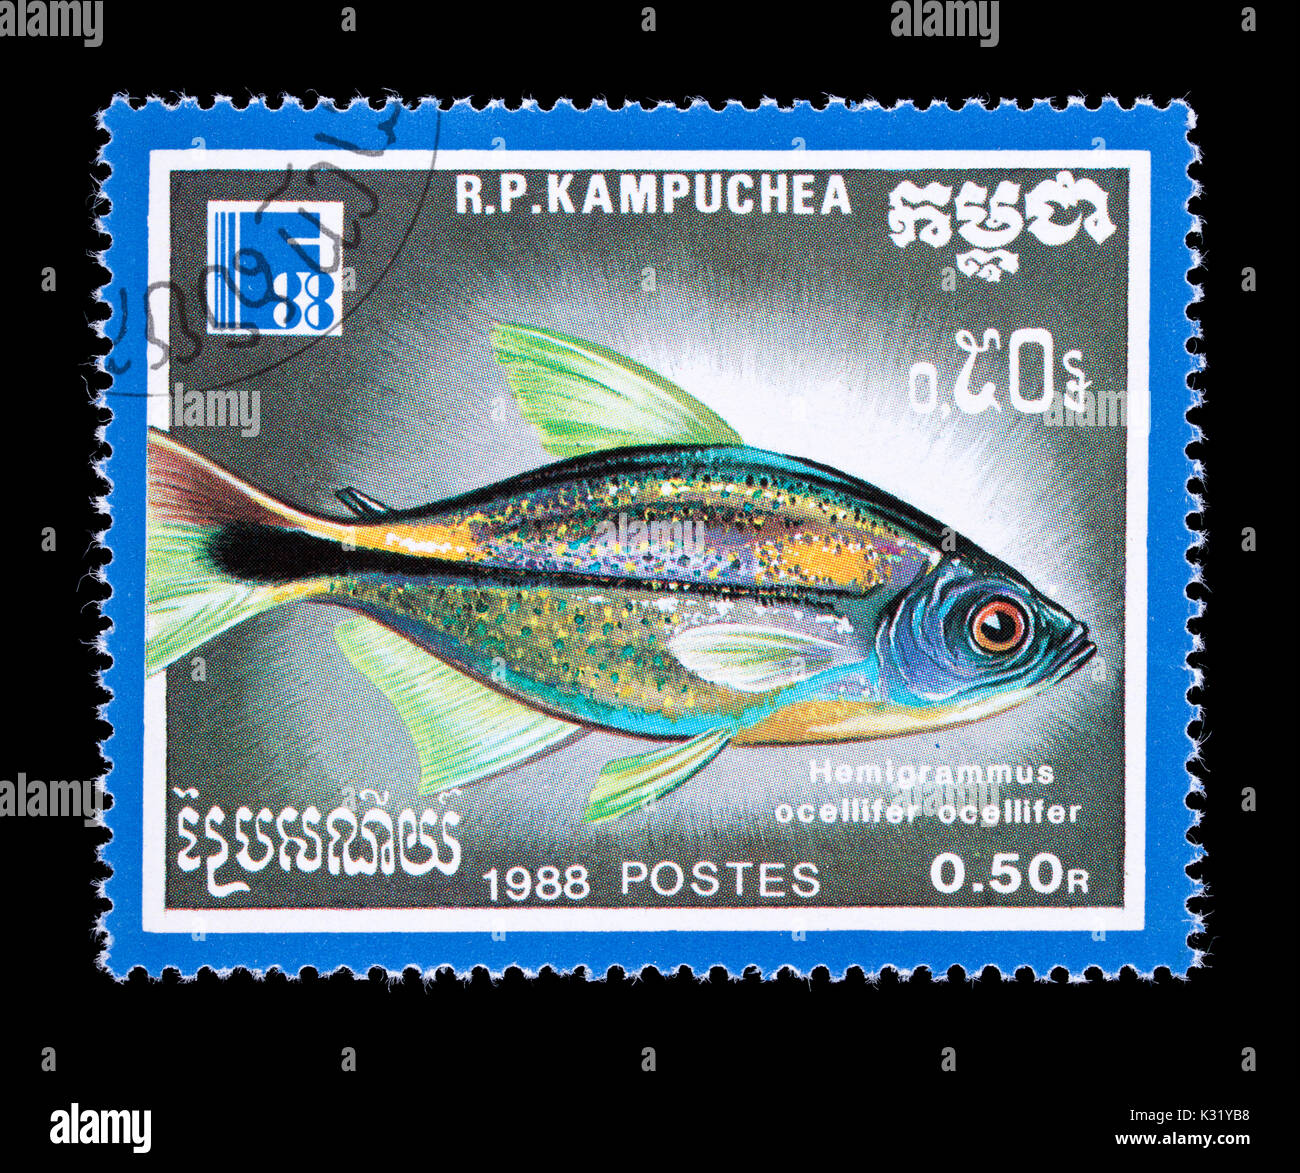 Postage stamp from Cambodia (Kampuchea) depicting a  Head-and-tail light Tetra (Hemigrammus ocellifer) Stock Photo